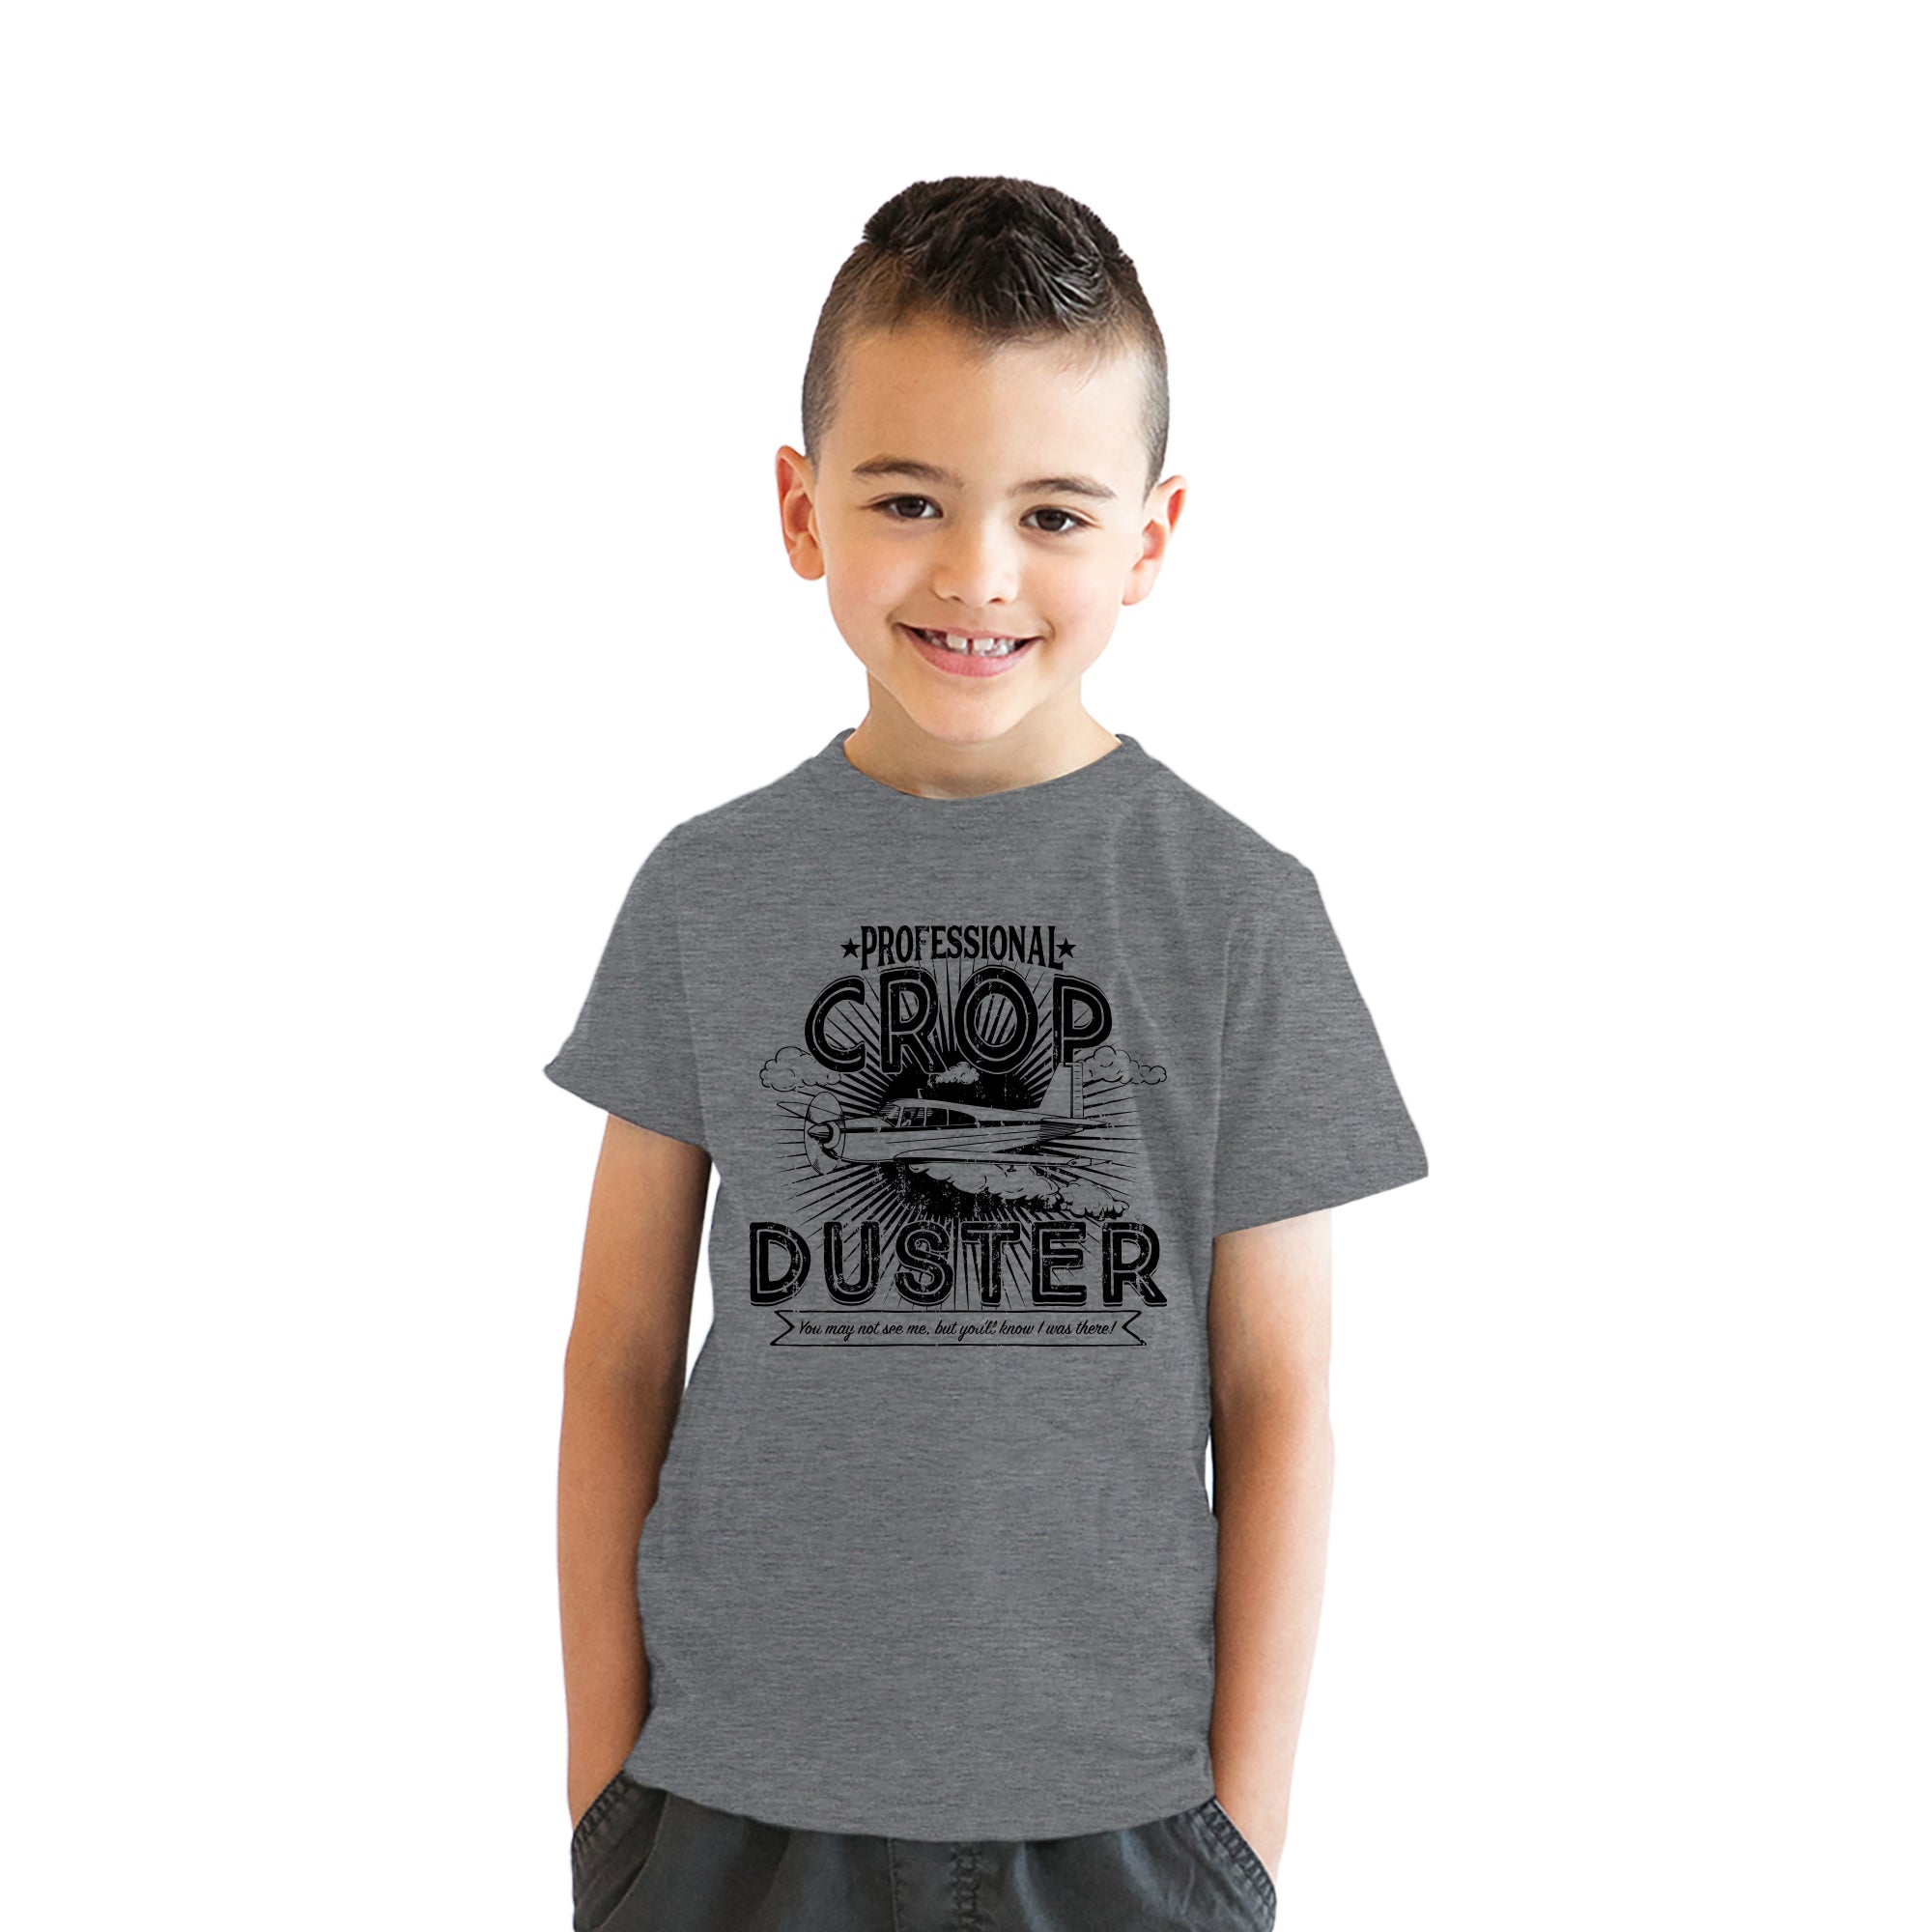 Funny Dark Heather Grey - DUSTER Professional Crop Duster Youth T Shirt Nerdy Toilet Sarcastic Tee